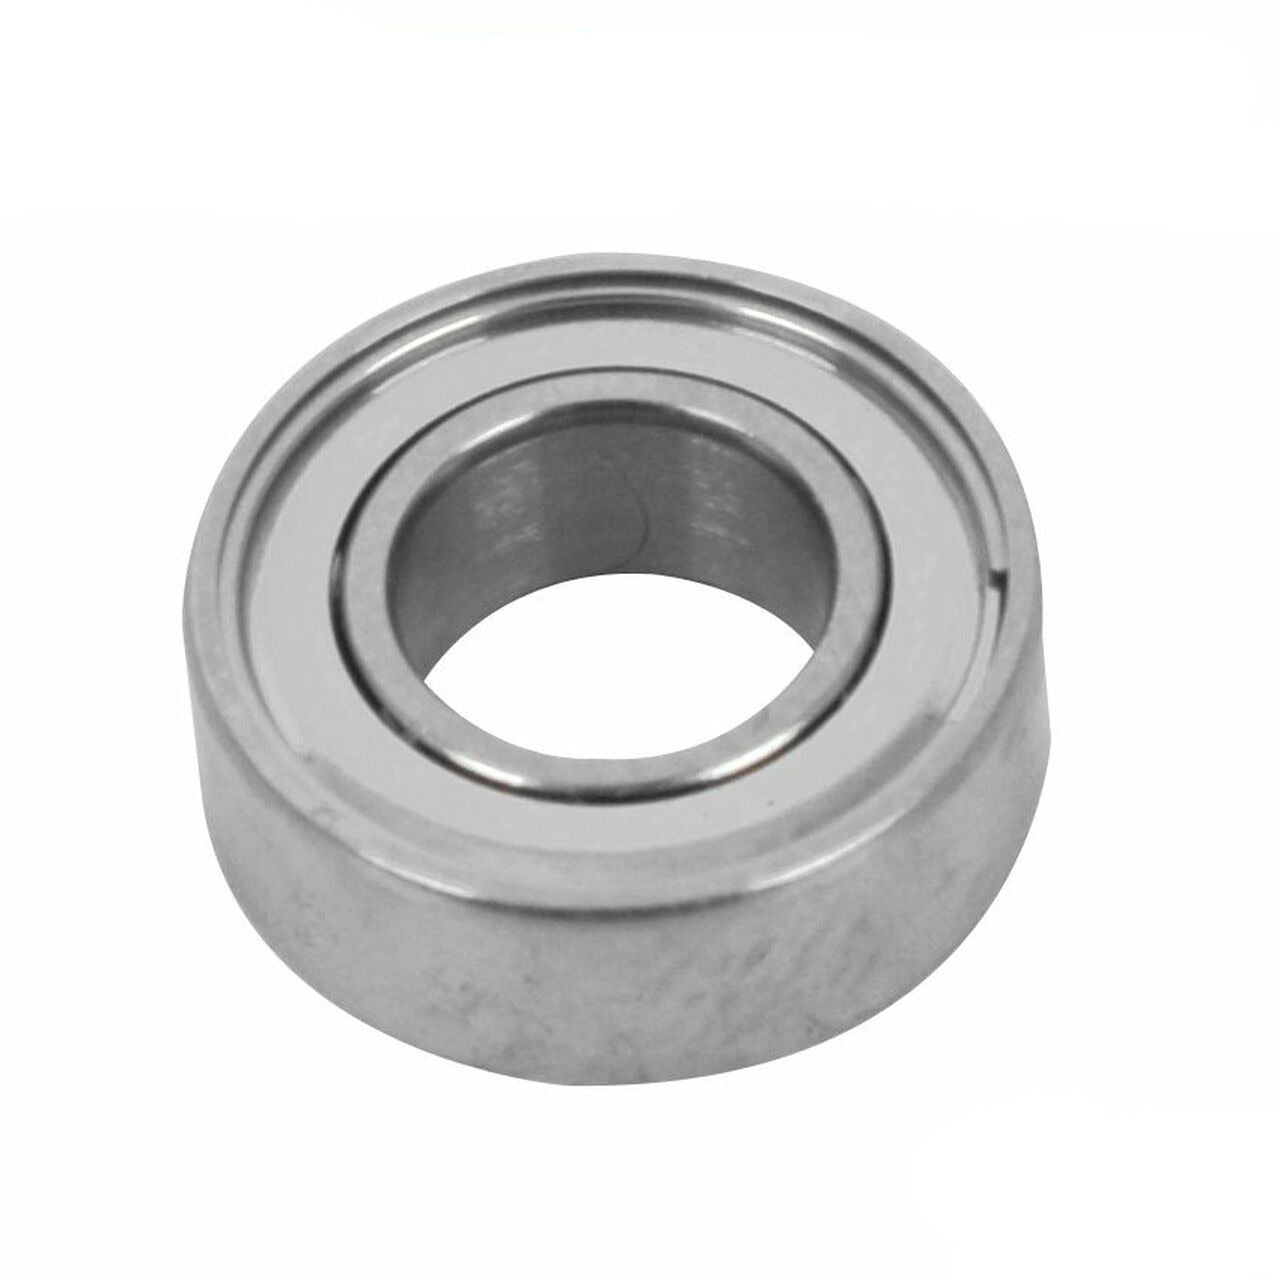 Dimar Bearing, 09.50 X 04.80 - 3/8 X 3/16 Power Tool Services